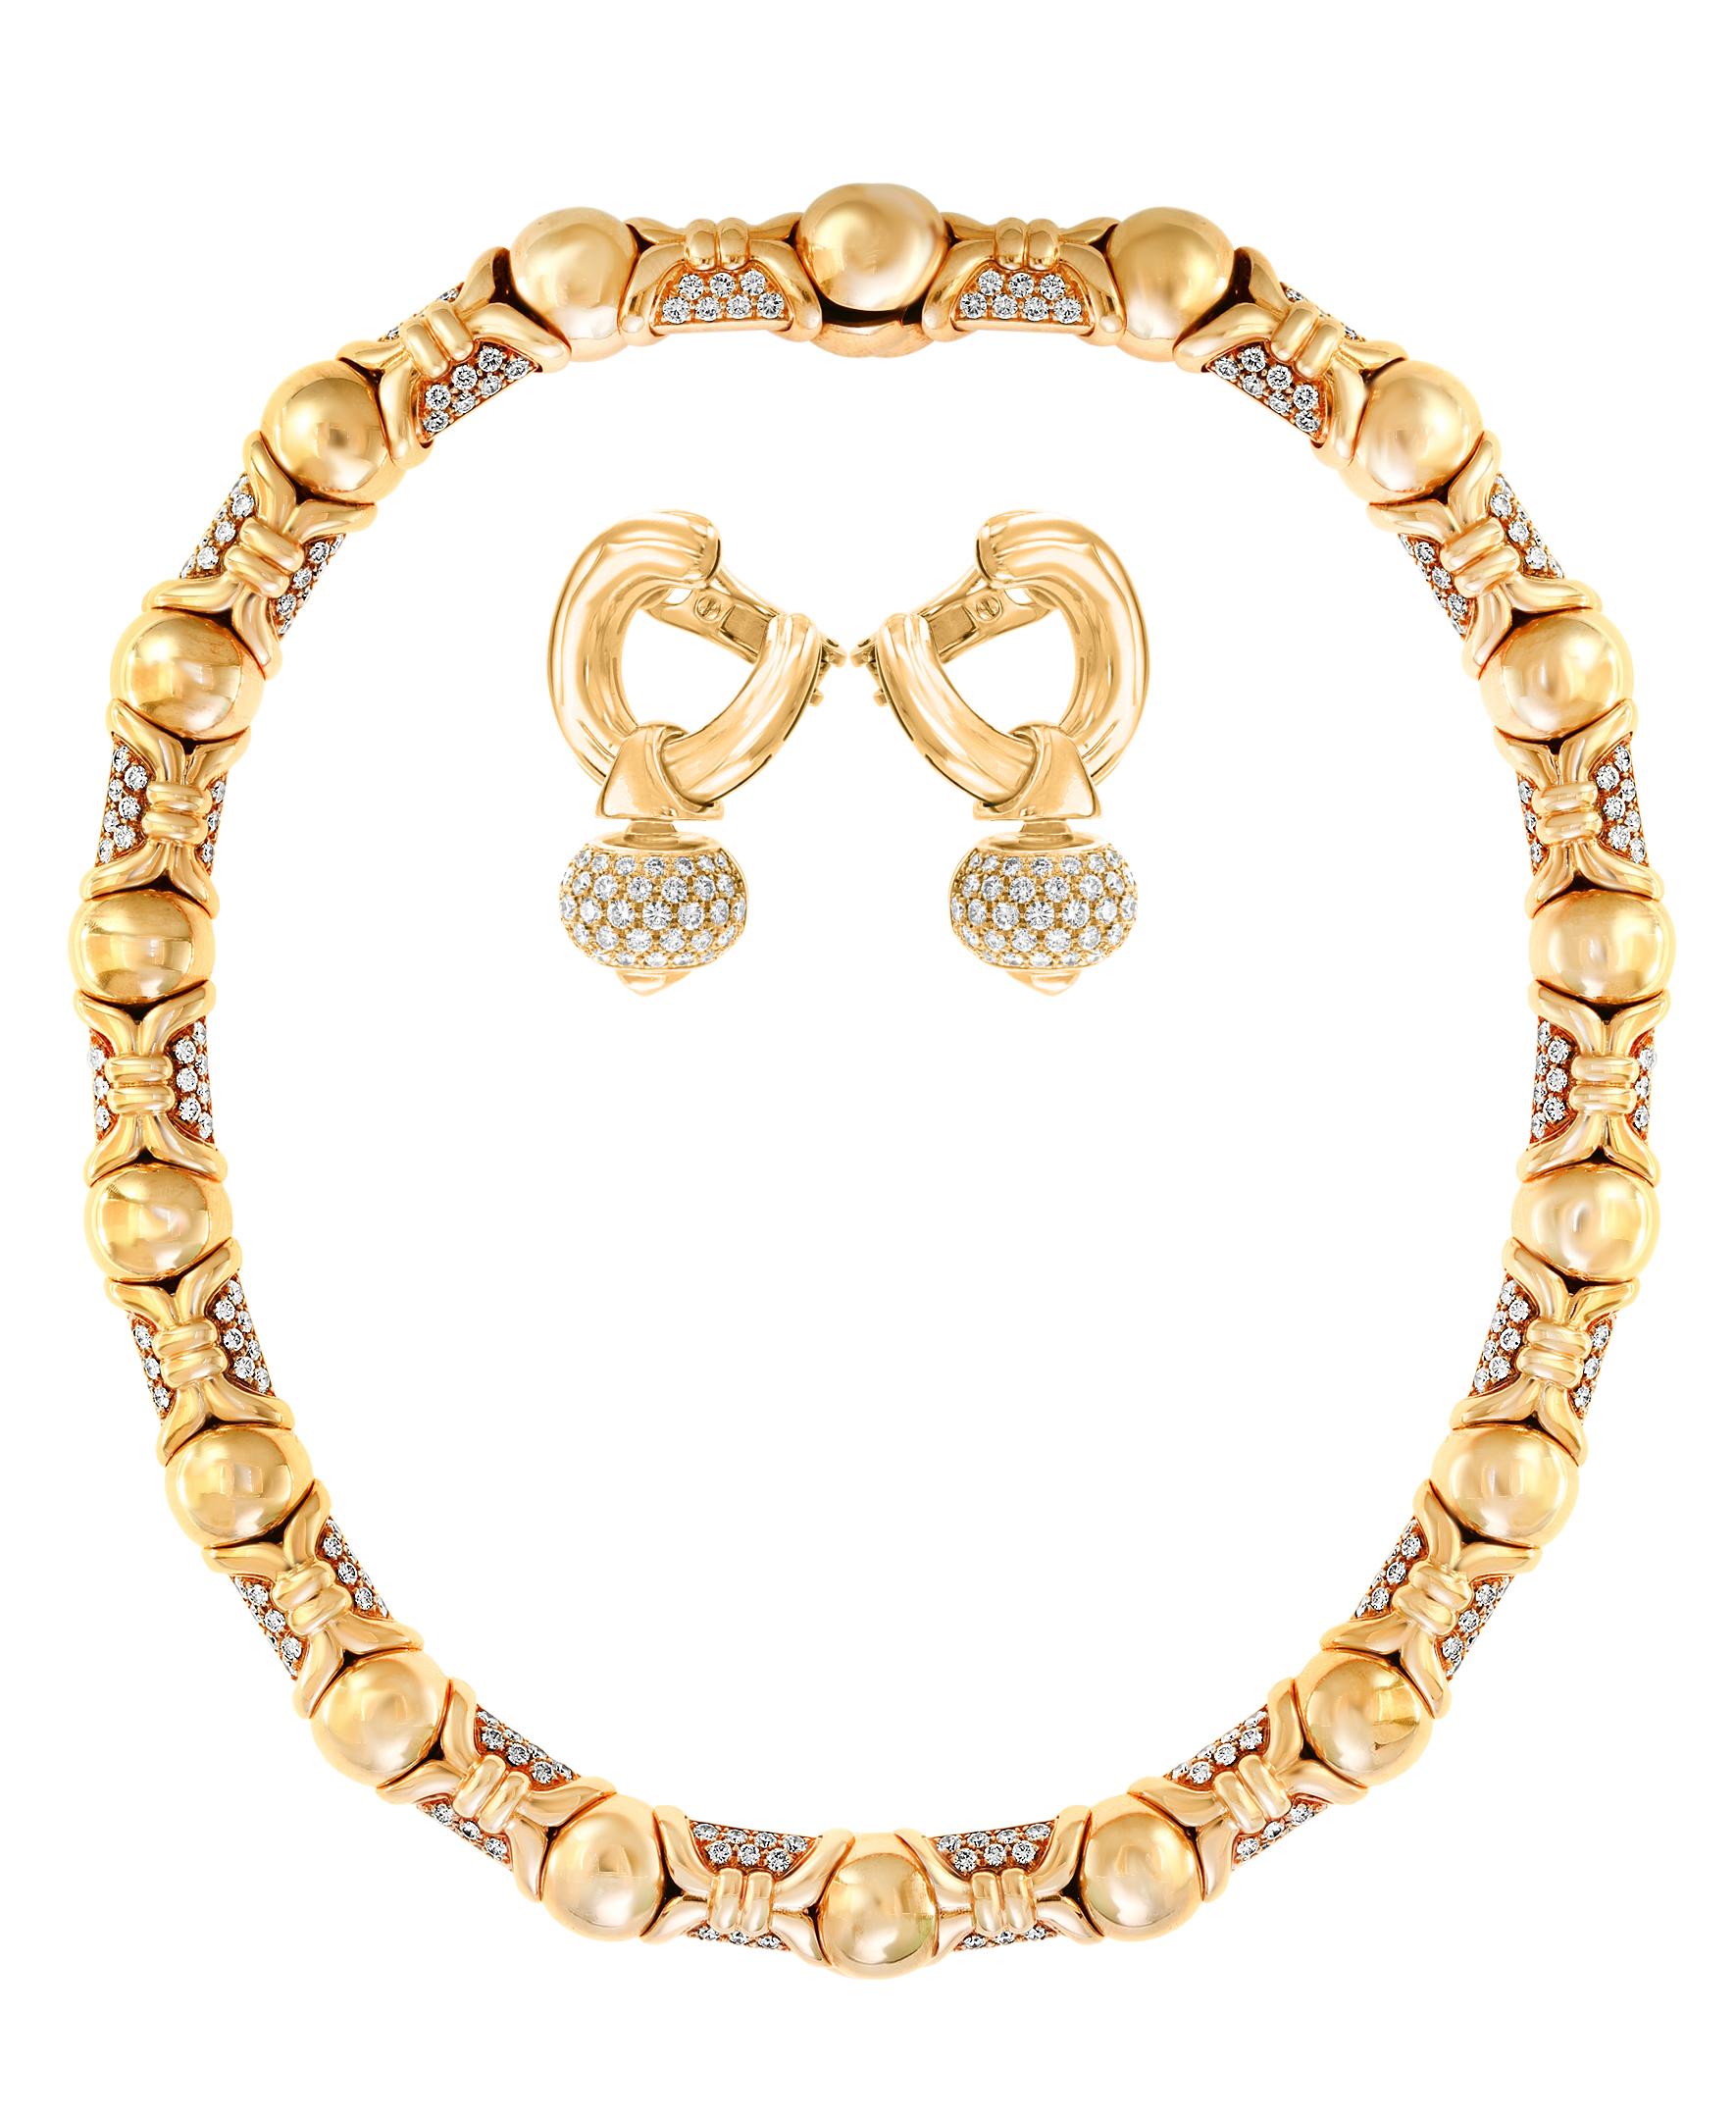 Bvlgari suite ,Necklace and Earrings in 18 karat gold and Diamonds.
A resplendent 1990's collar necklace by Bulgari, finely crafted with several rows of beaming pave-set brilliant-cut diamonds alternating with gold design.
The necklace comes with